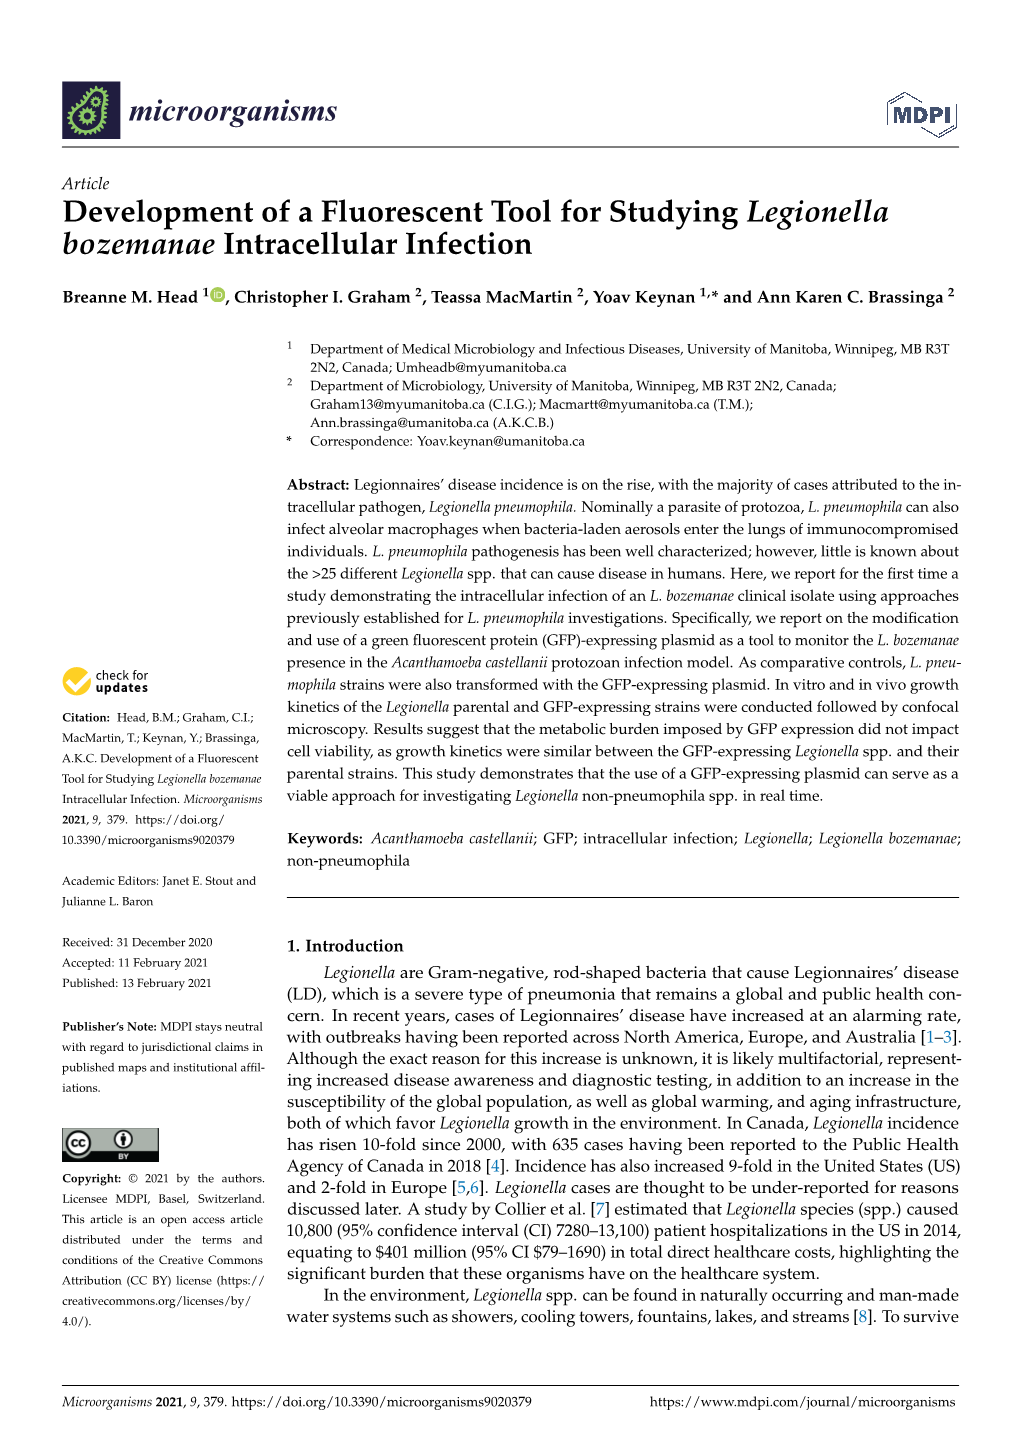 Development of a Fluorescent Tool for Studying Legionella Bozemanae Intracellular Infection